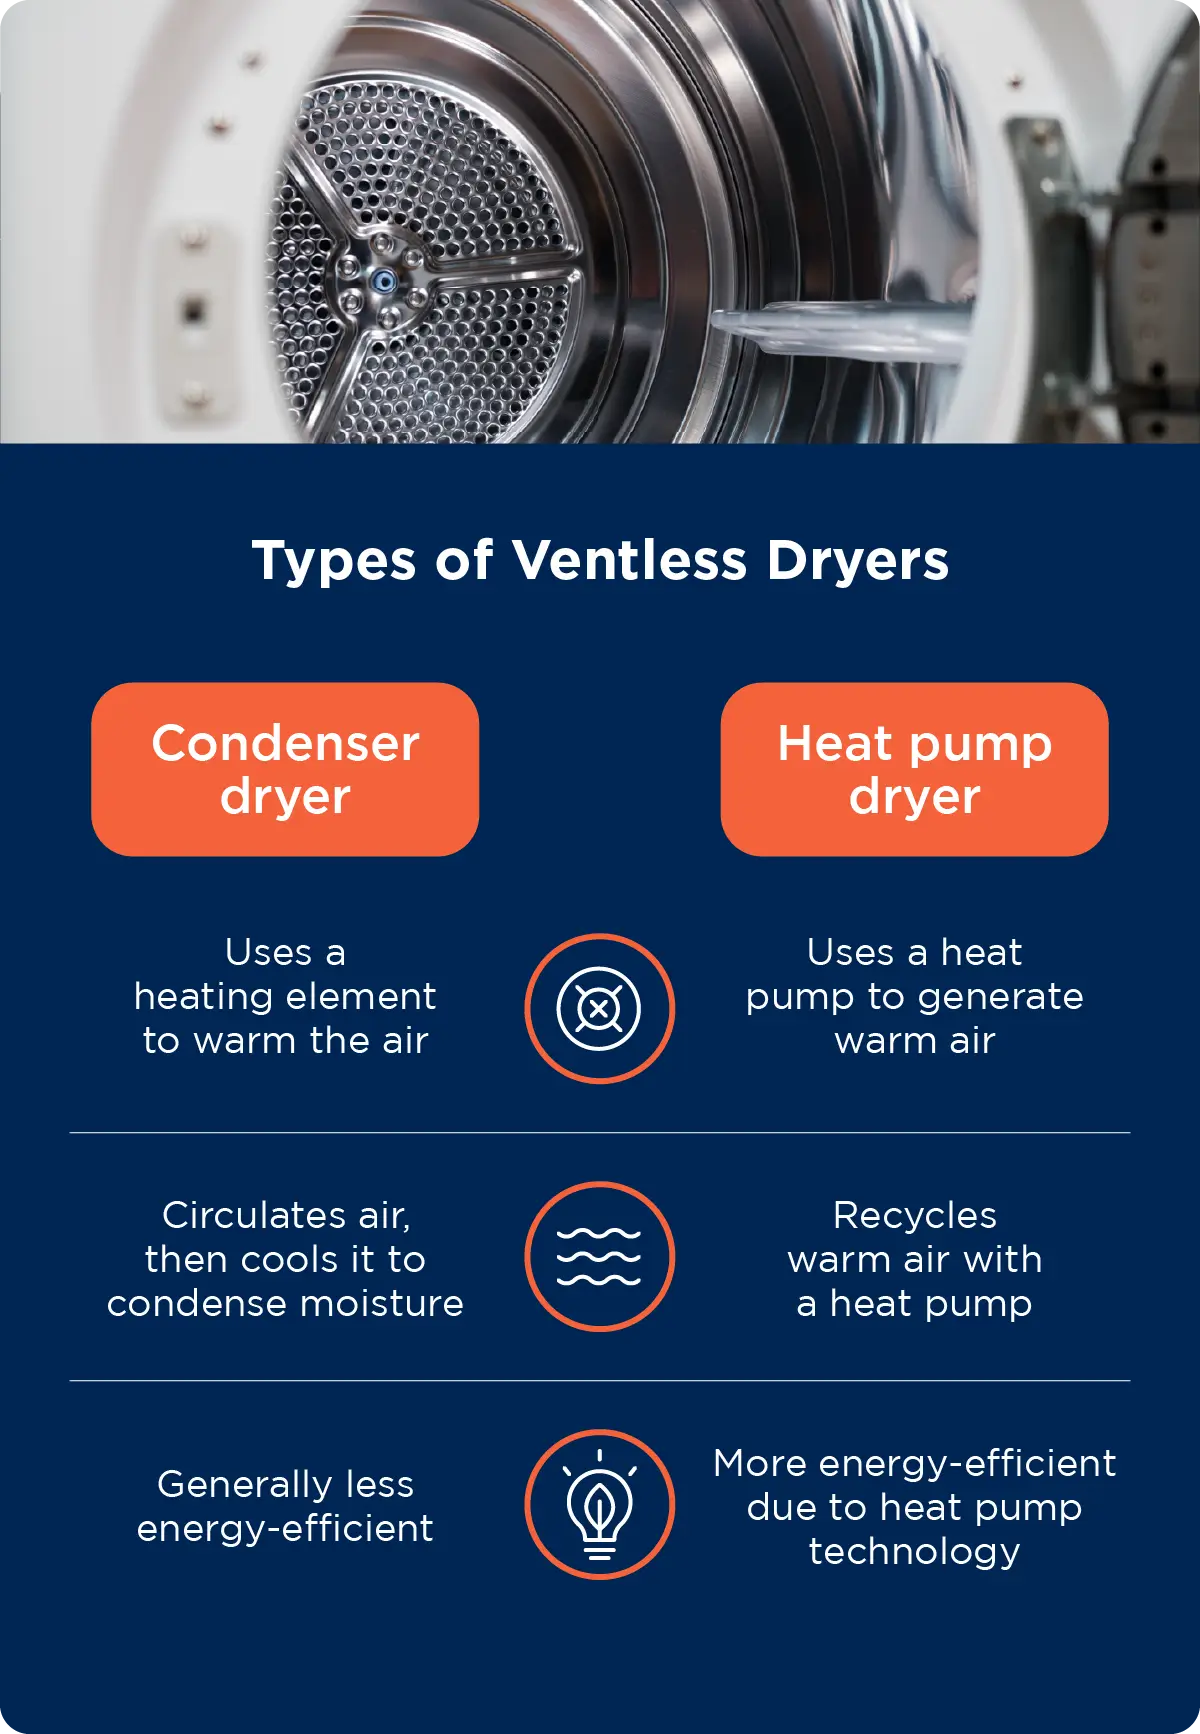 Graphic showing the difference between condenser and heat pump dryers.